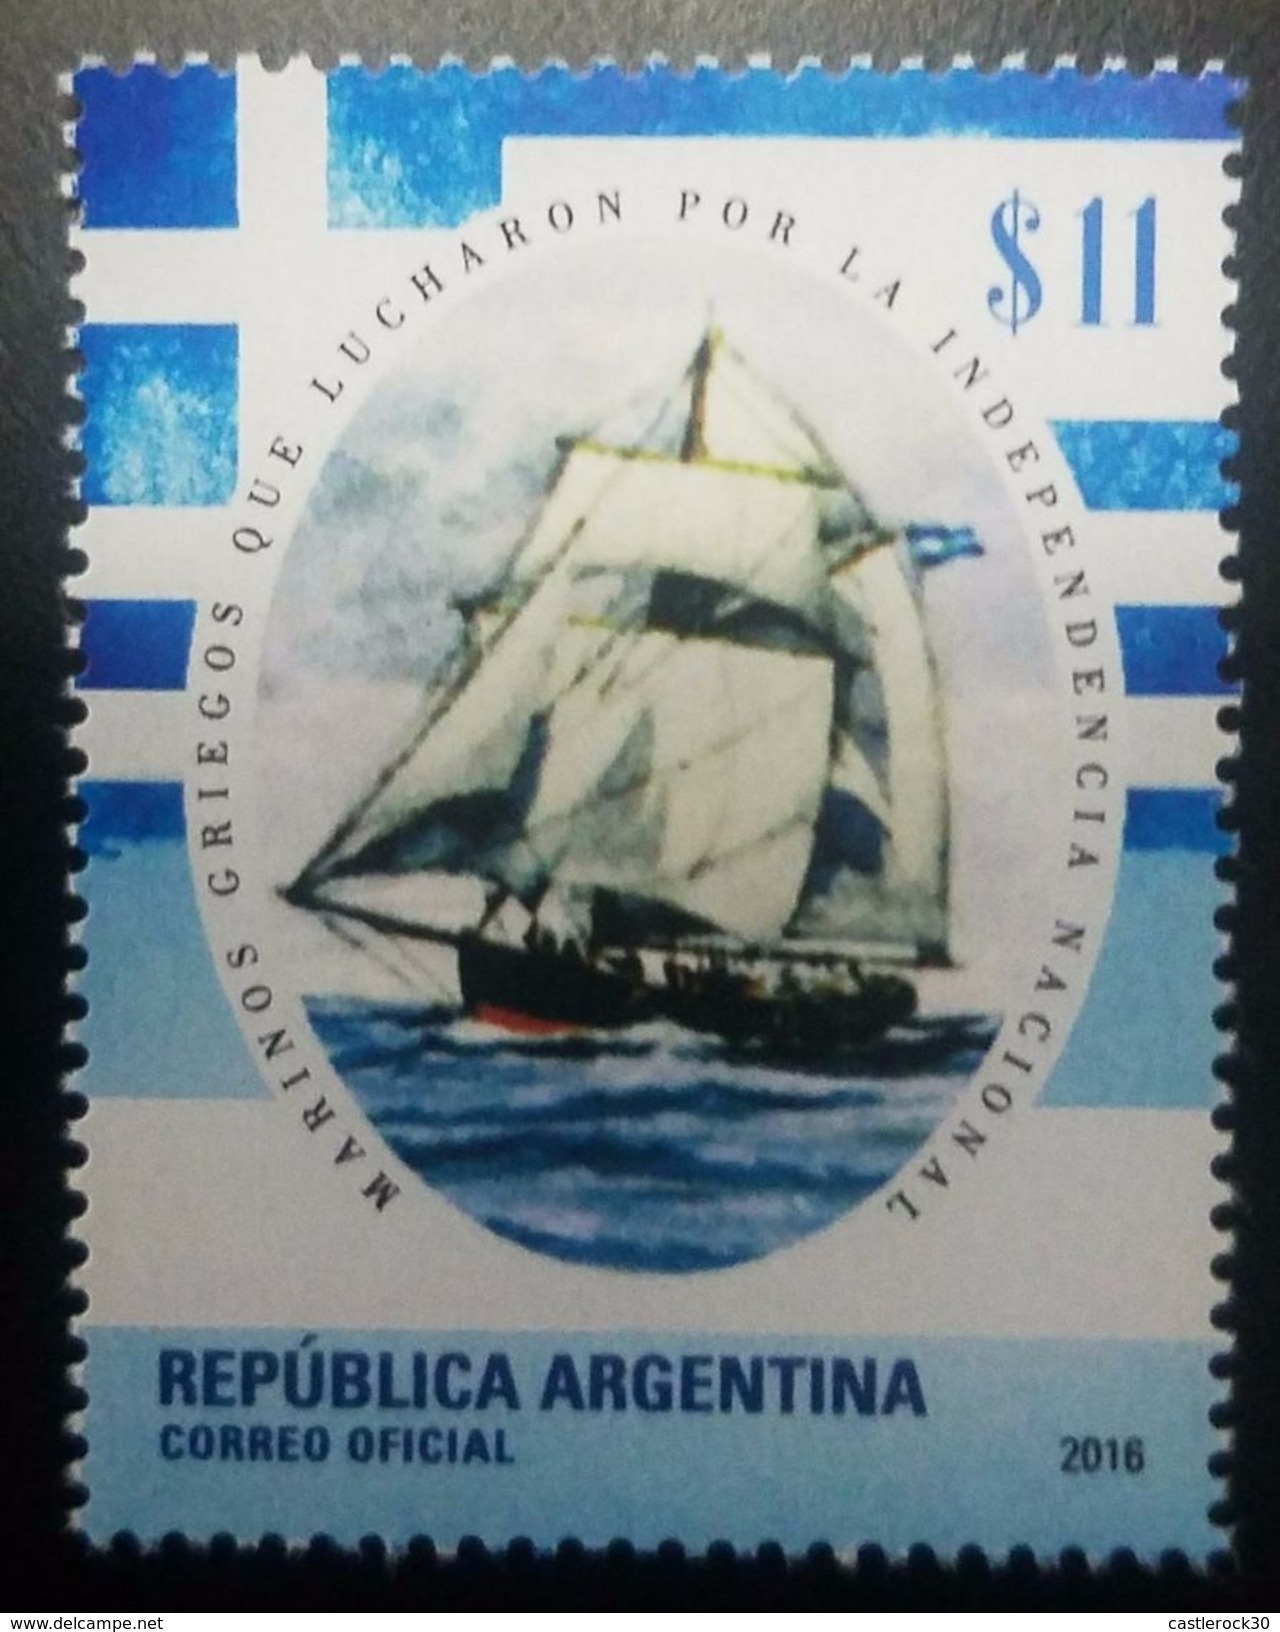 RL) 2016 ARGENTINA, GREEK MARINE THAT FIGHT FOR INDEPENDENCE, SHIP, FLAG, MILITARY, BLUE - Neufs